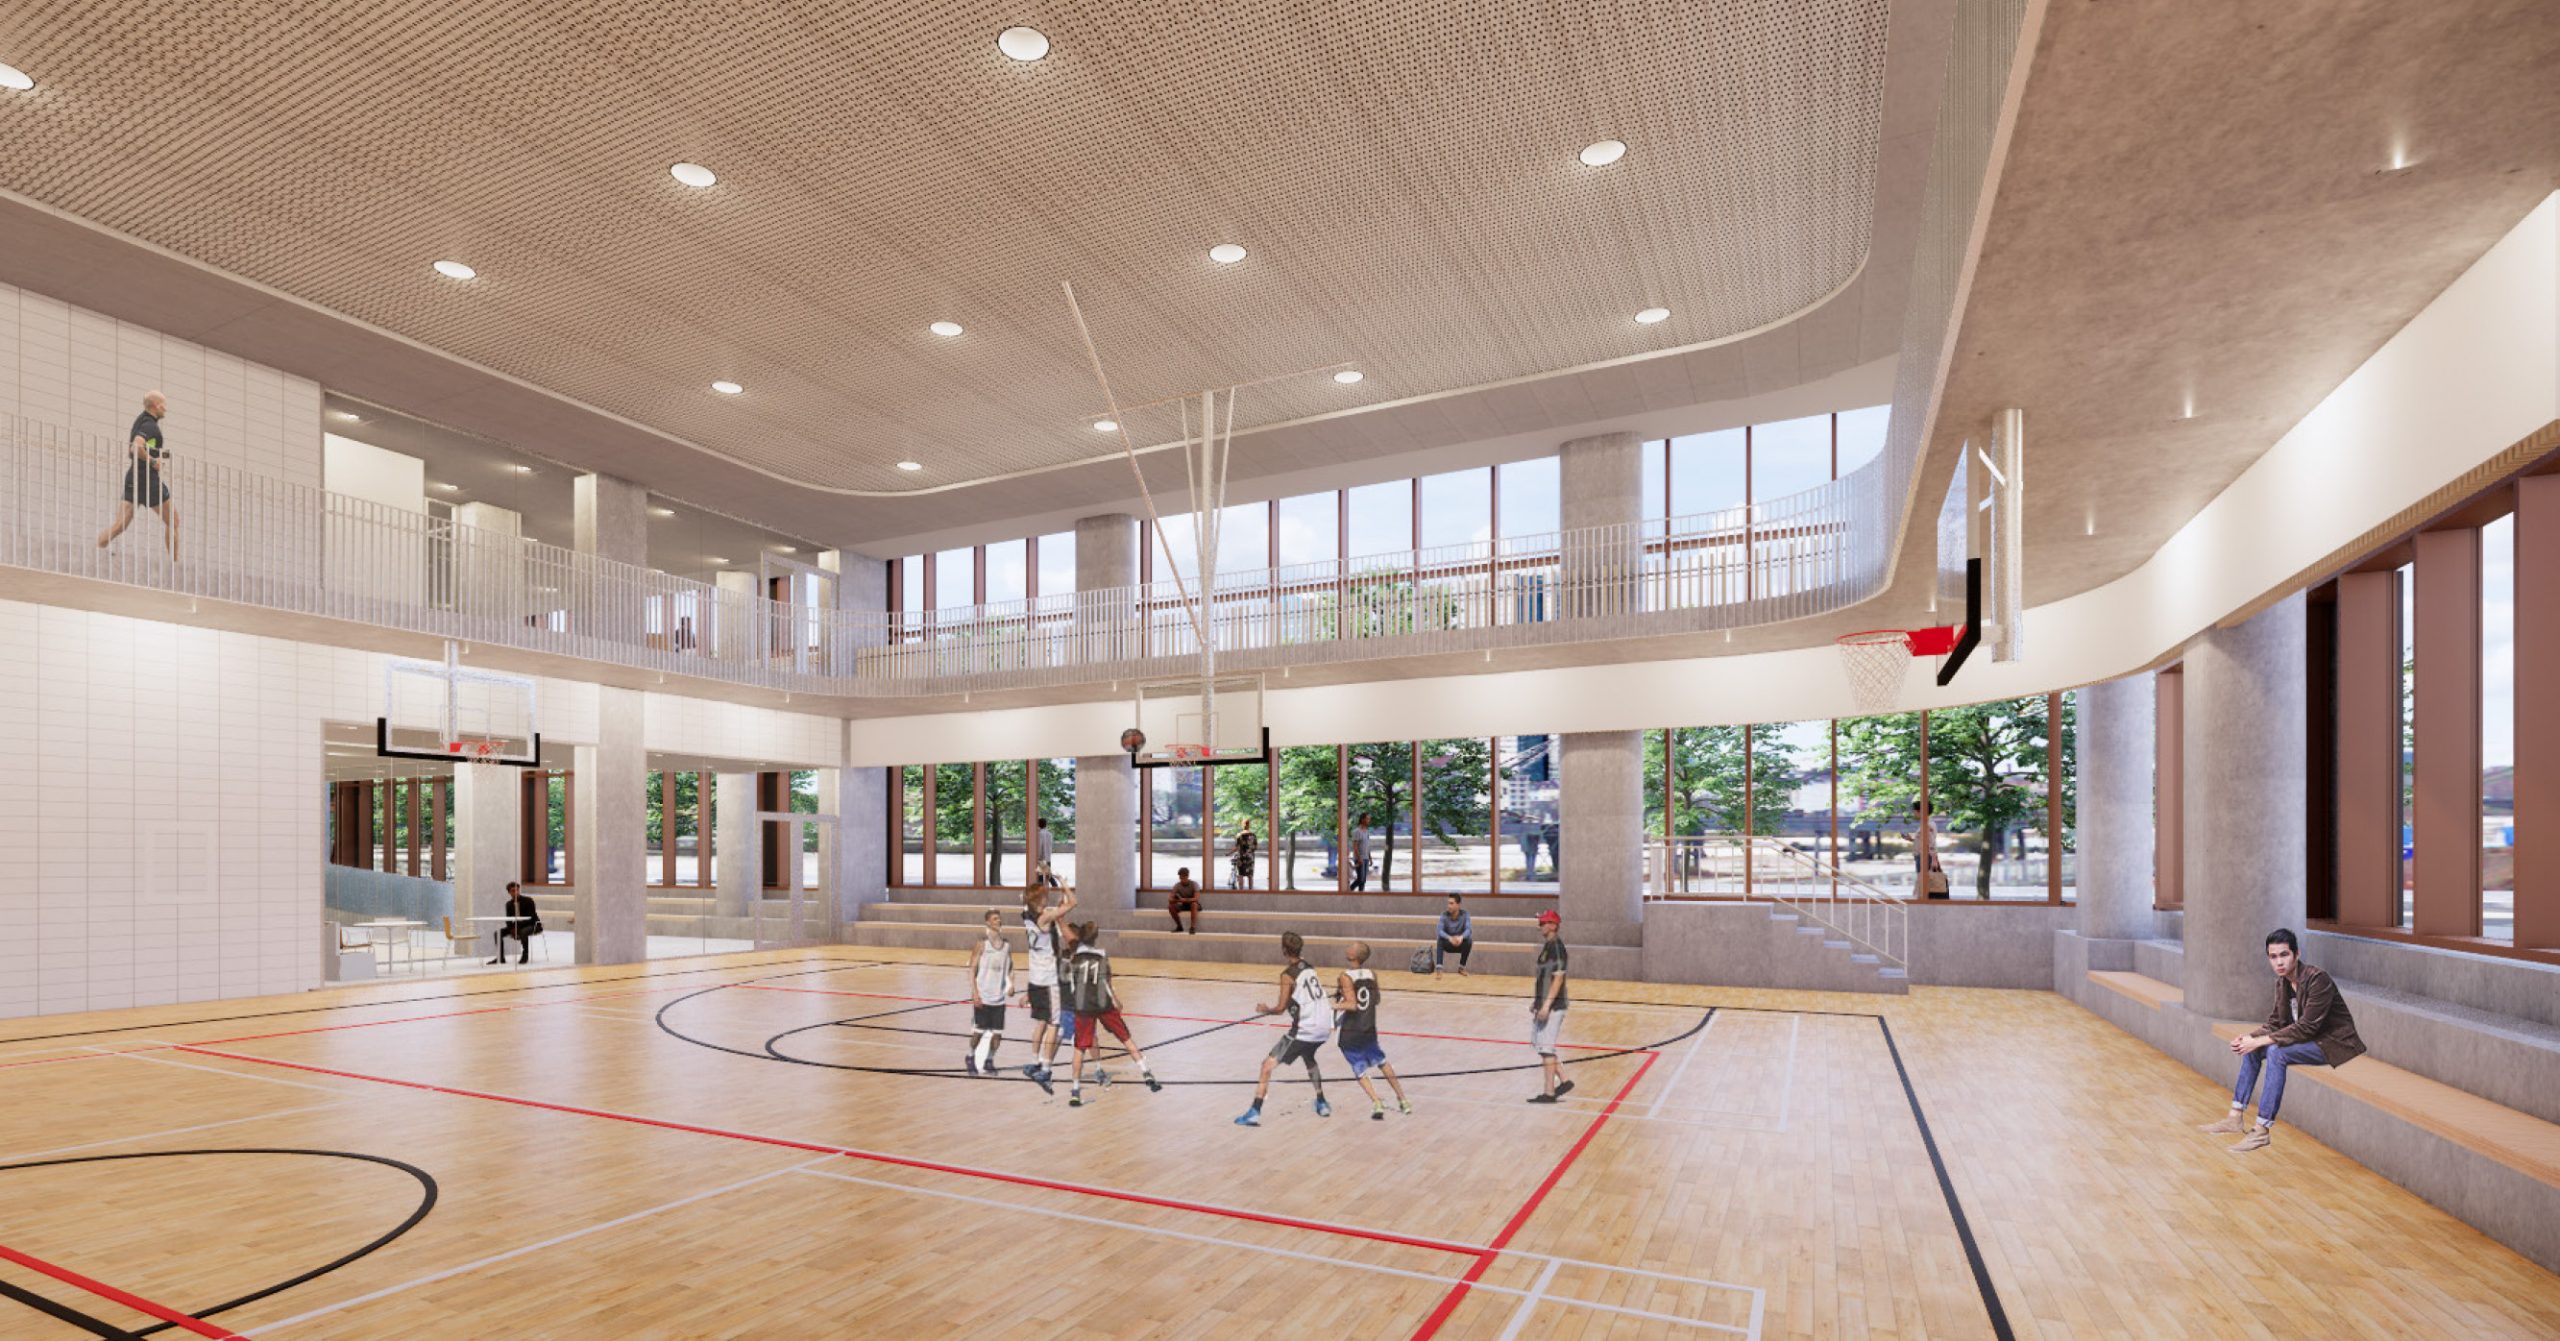 An illustration of the community recreation centre gymnasium, which shows people playing basketball. The gymnasium has wall to wall bench seating on one side and a running/walking track surrounds the perimeter of the gymnasium from the second floor.